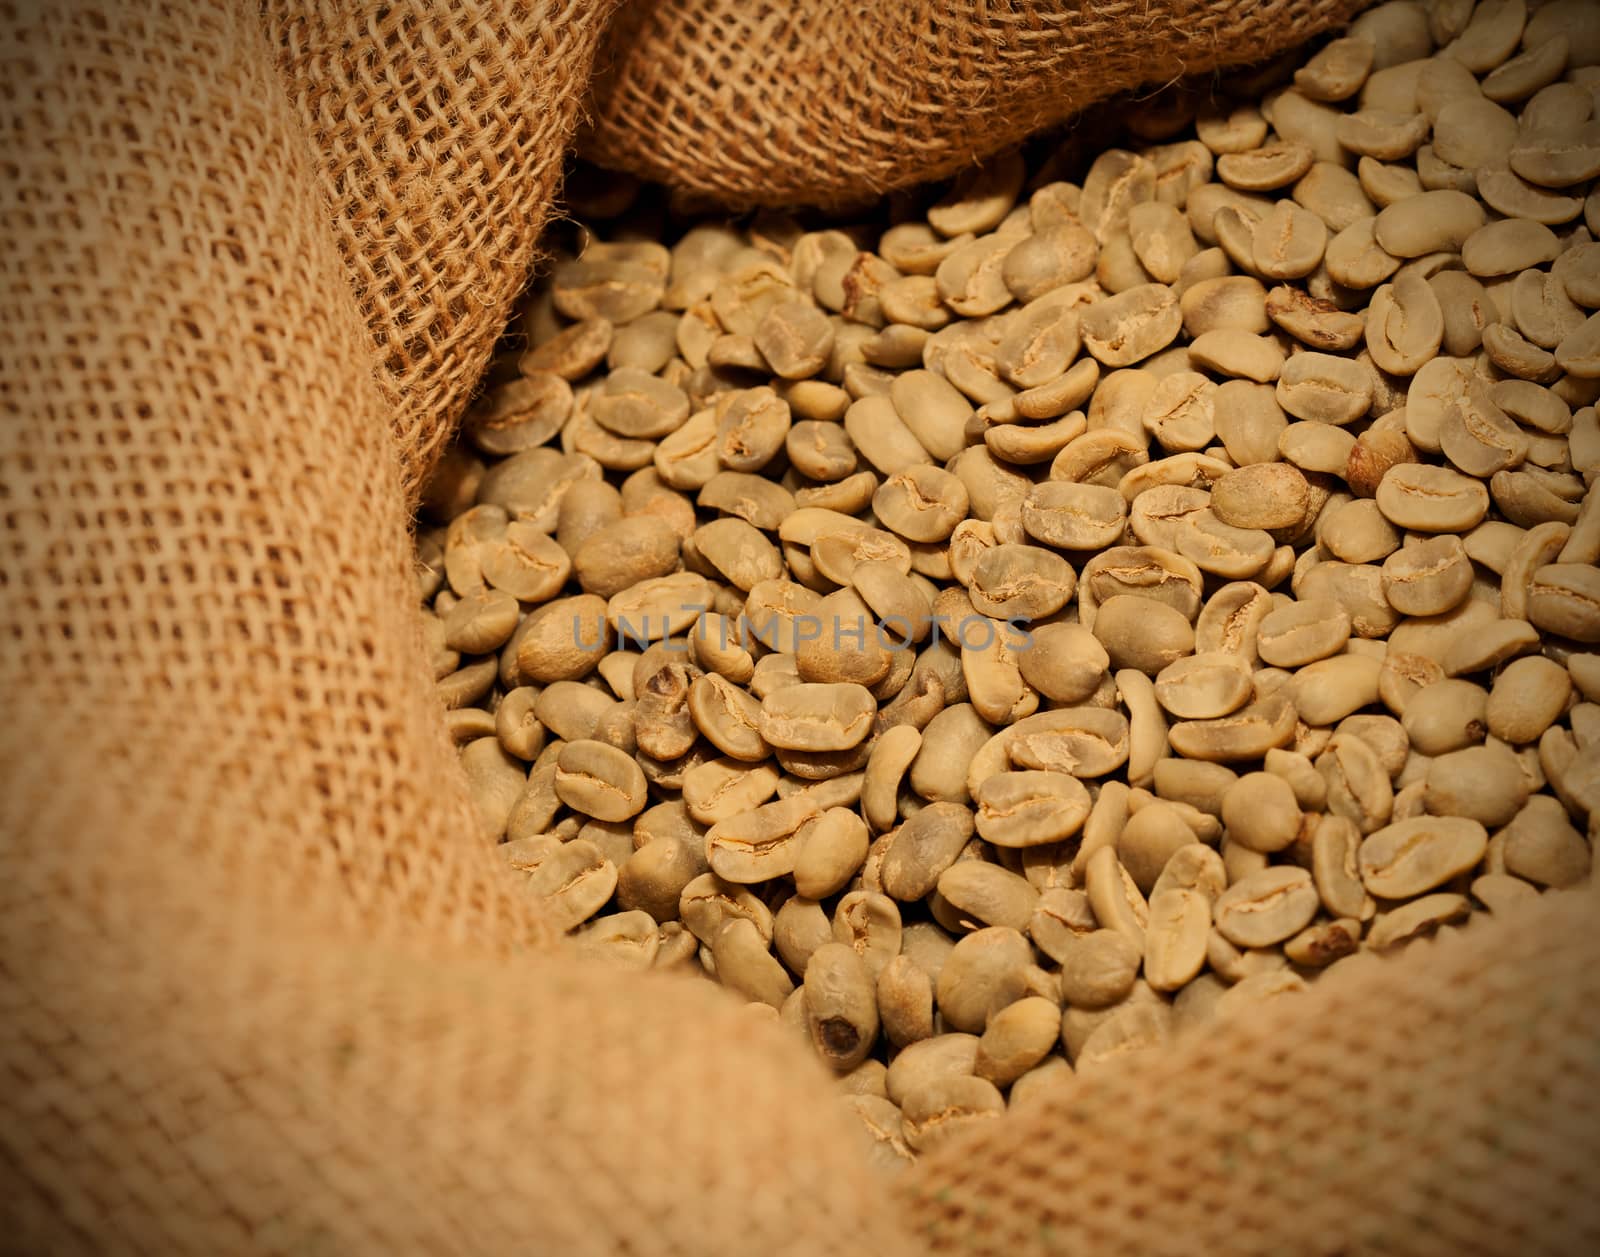 raw coffee beans in a sack, instagram image style